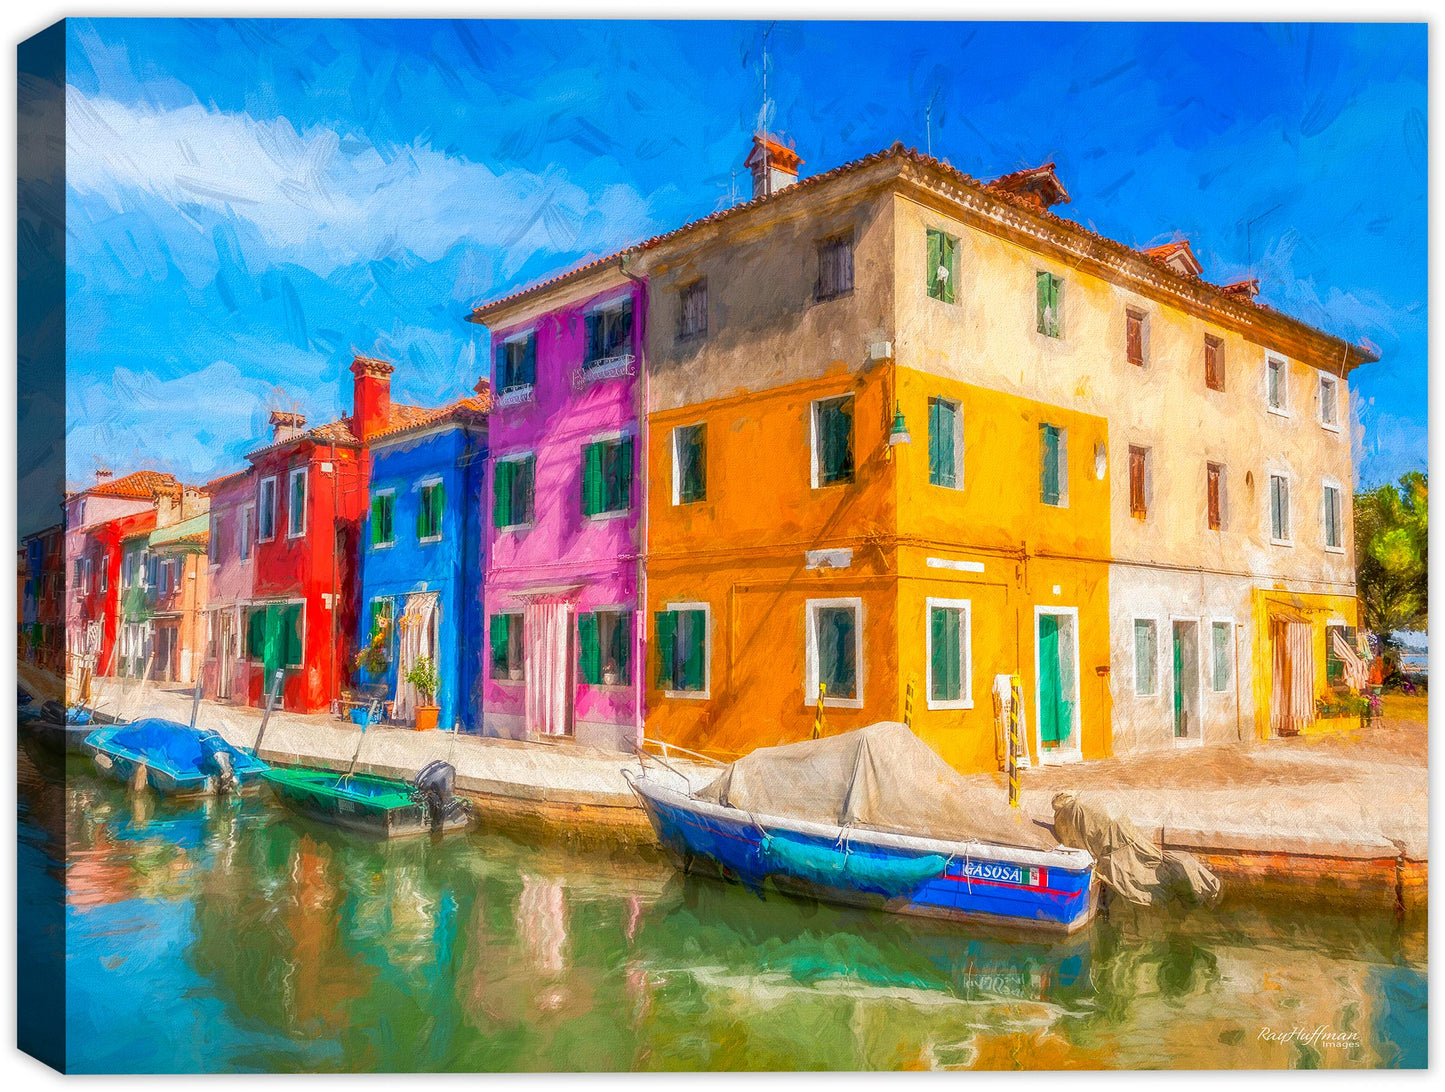 Sunny Day in Venice - Painting